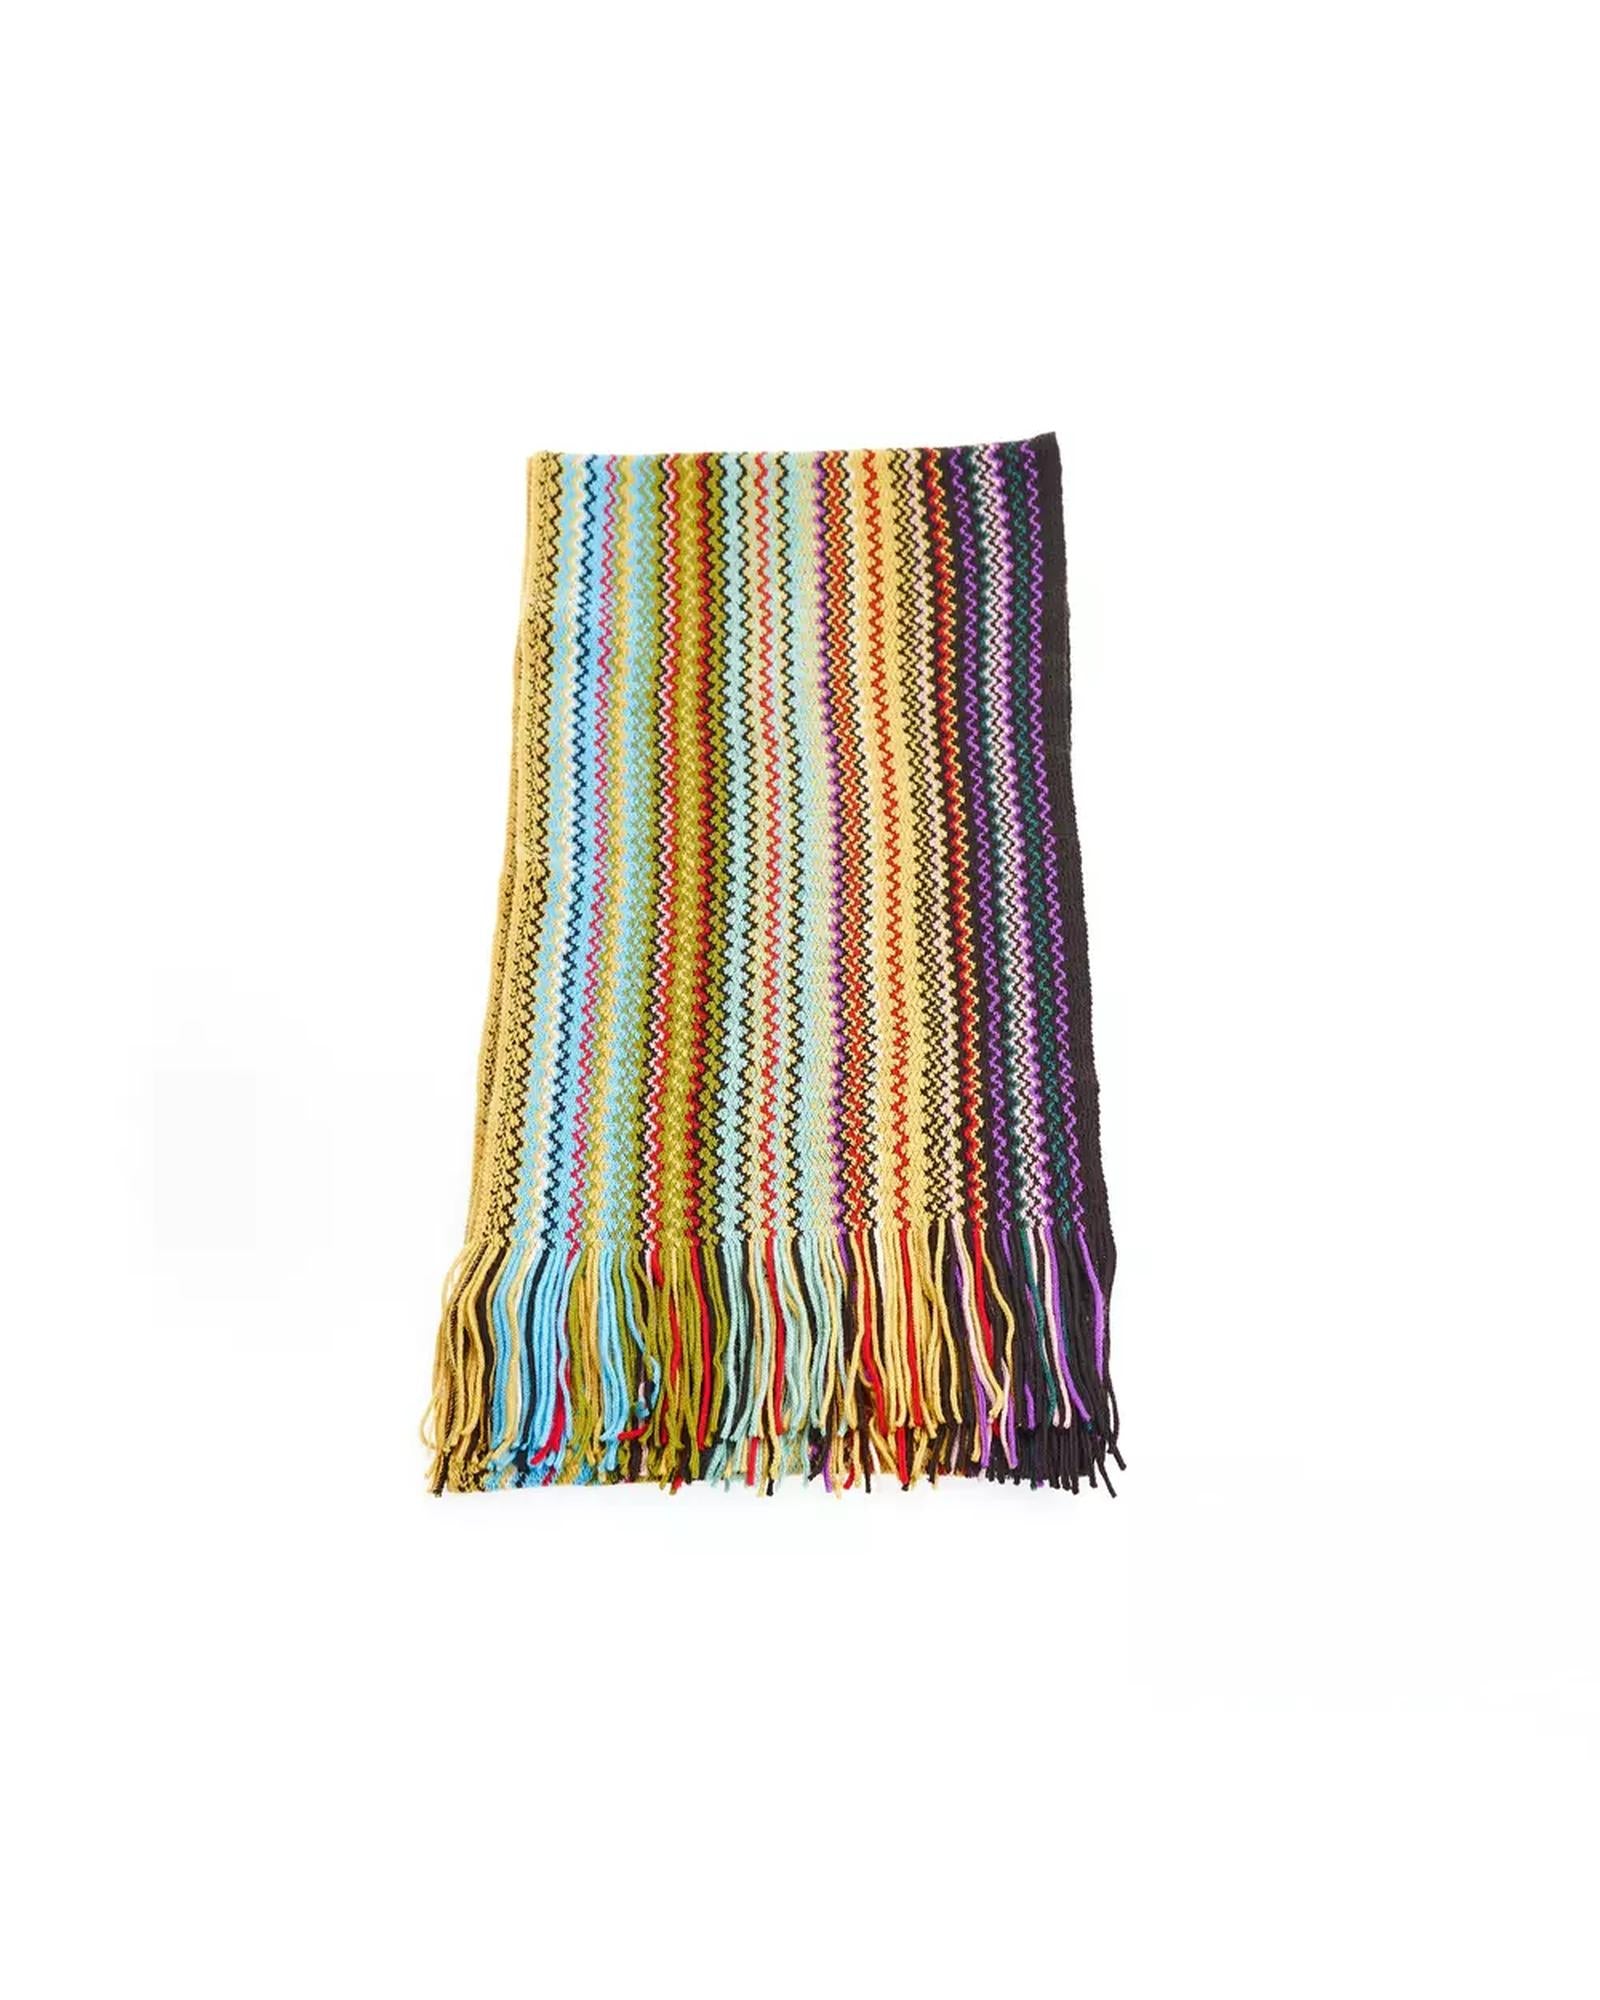 Geometric Fringed Scarf with Vibrant Colors One Size Women